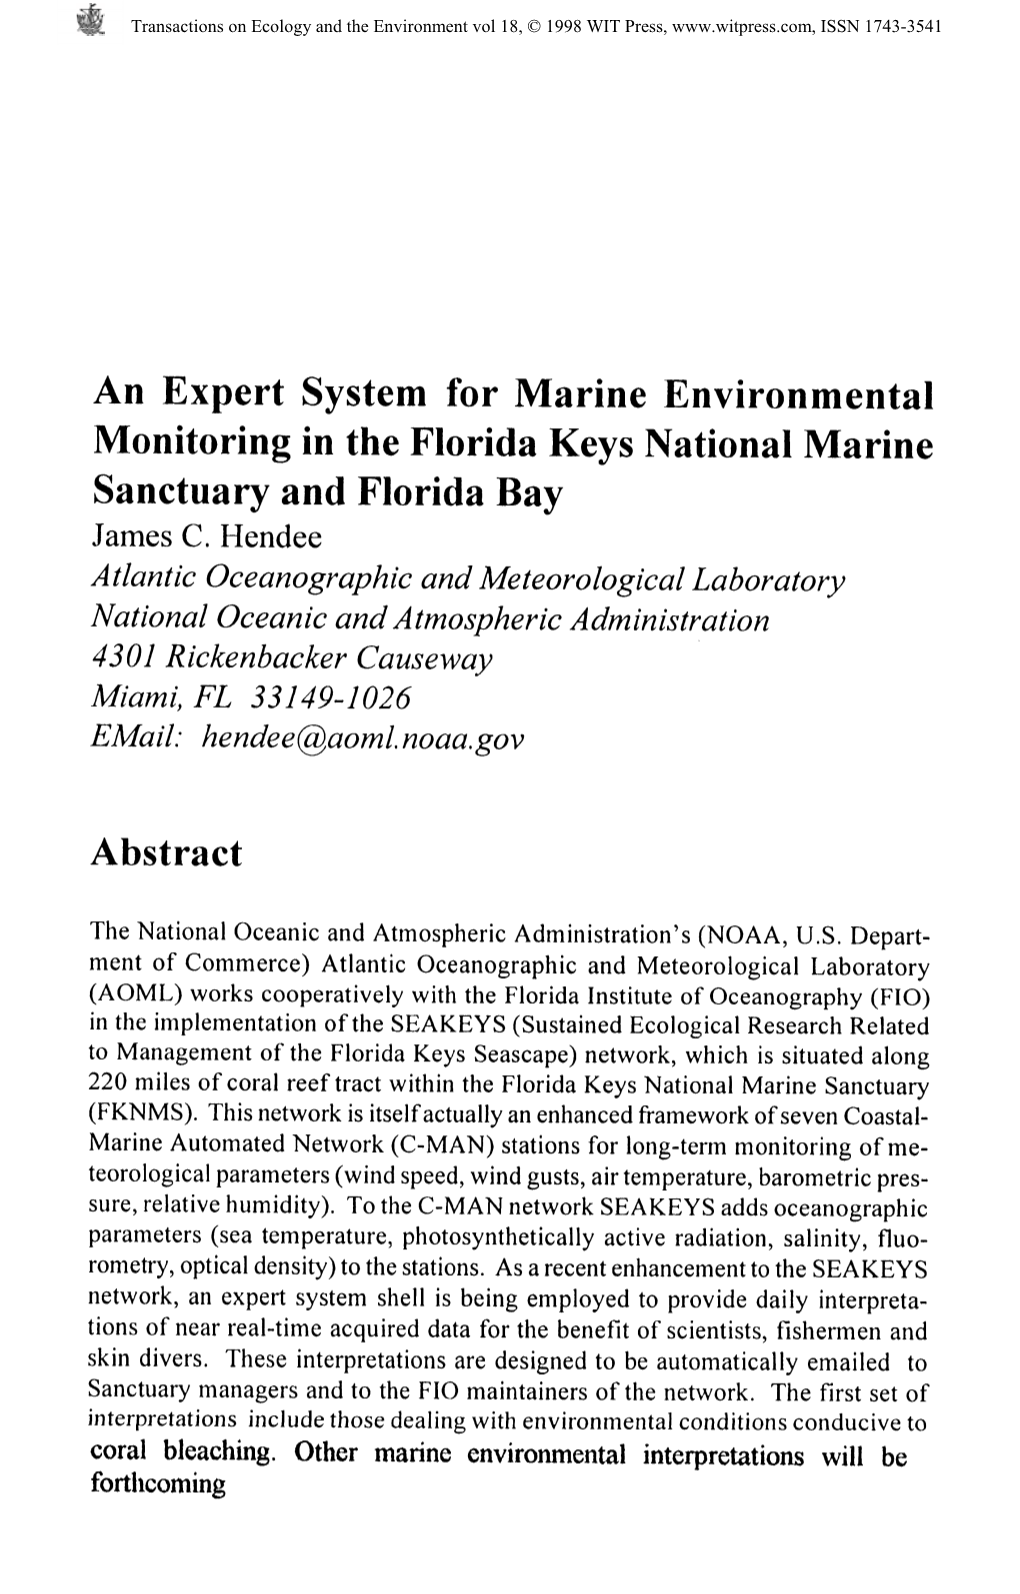 An Expert System for Marine Environmental Monitoring in The